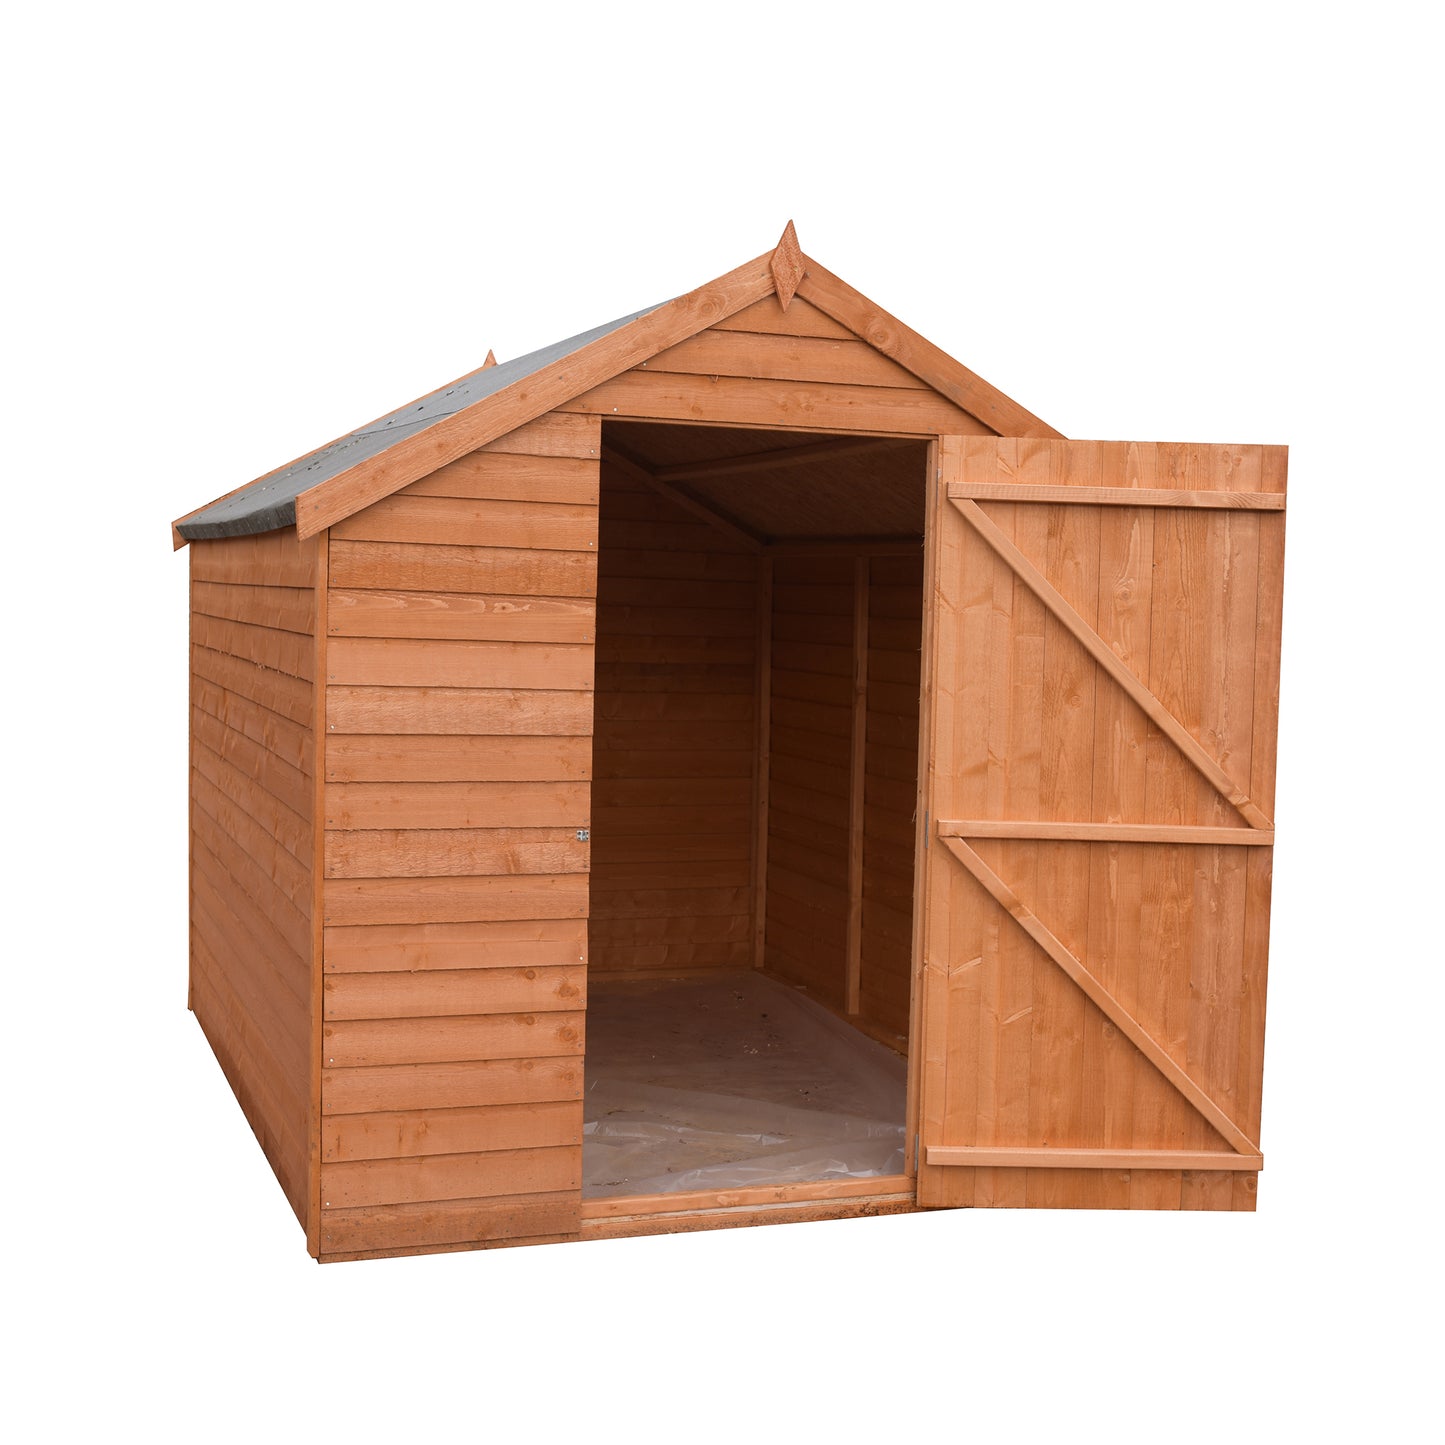 Shire 8 x 6 Overlap Value Dip Treated Garden Shed Shed - Premium Garden